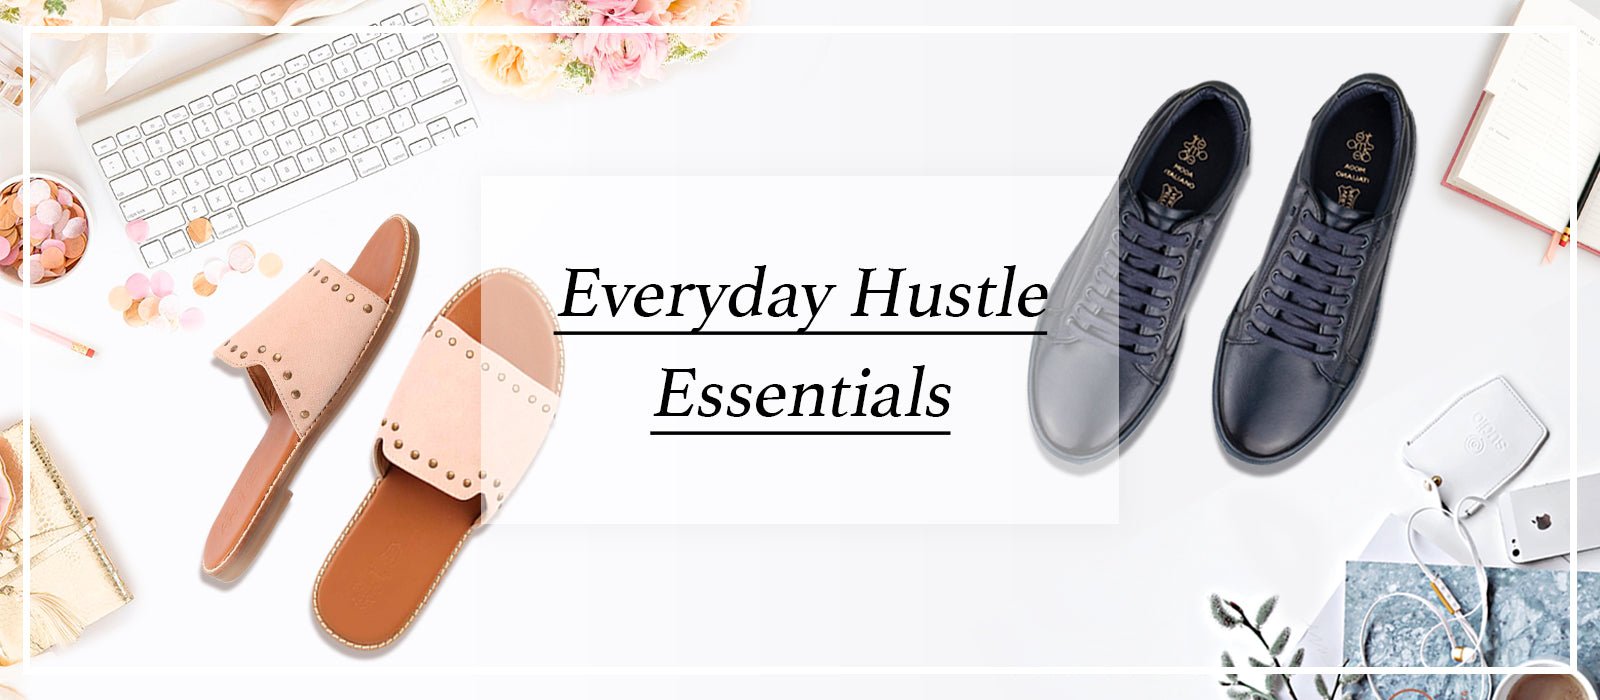 Gear up for your everyday hustle! - Tresmode